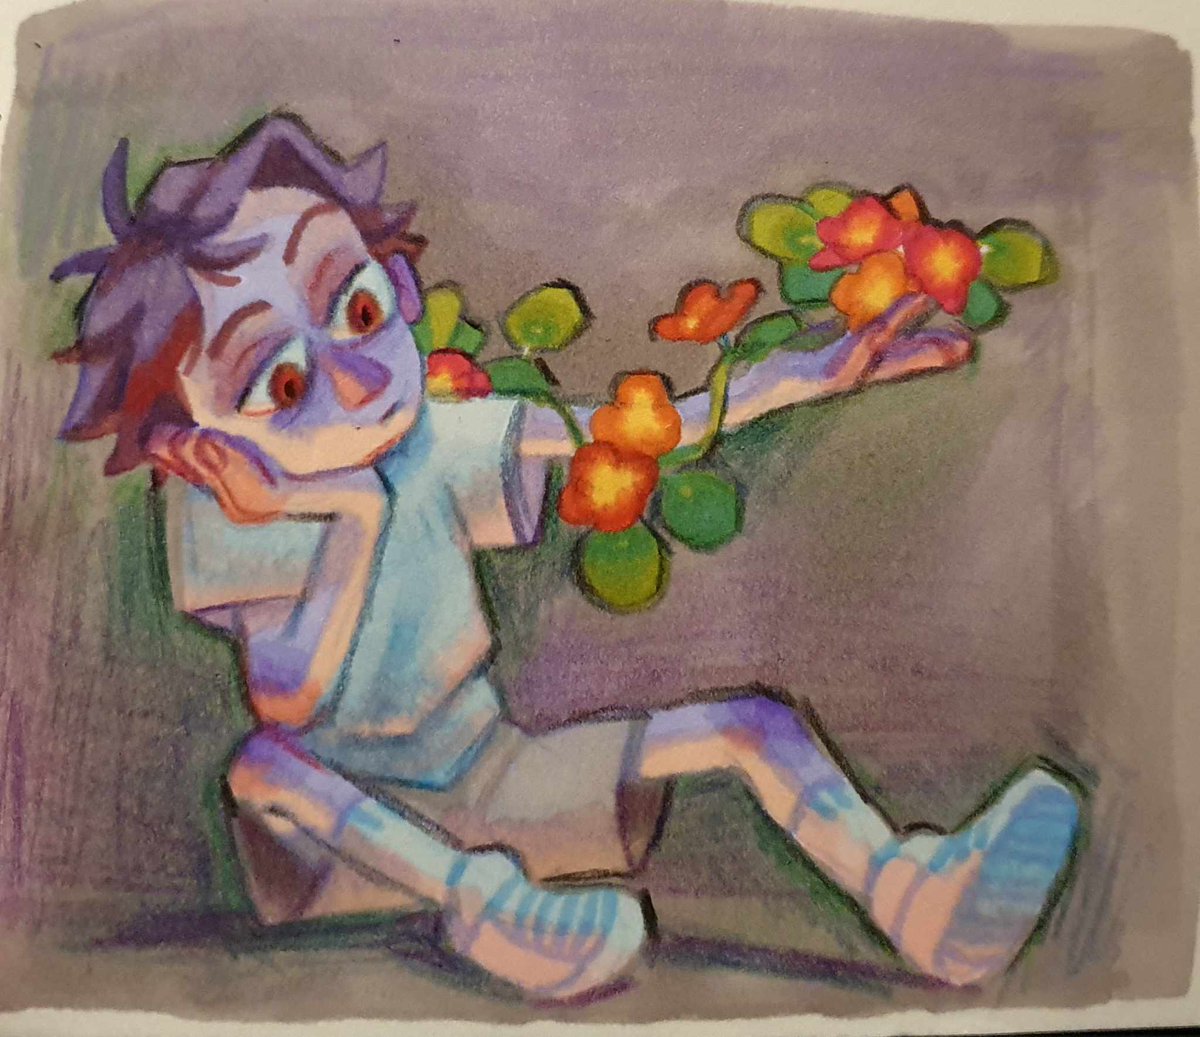 Drew a small oikawa for an anon on tumblr 🌱 My marker experimentation continues